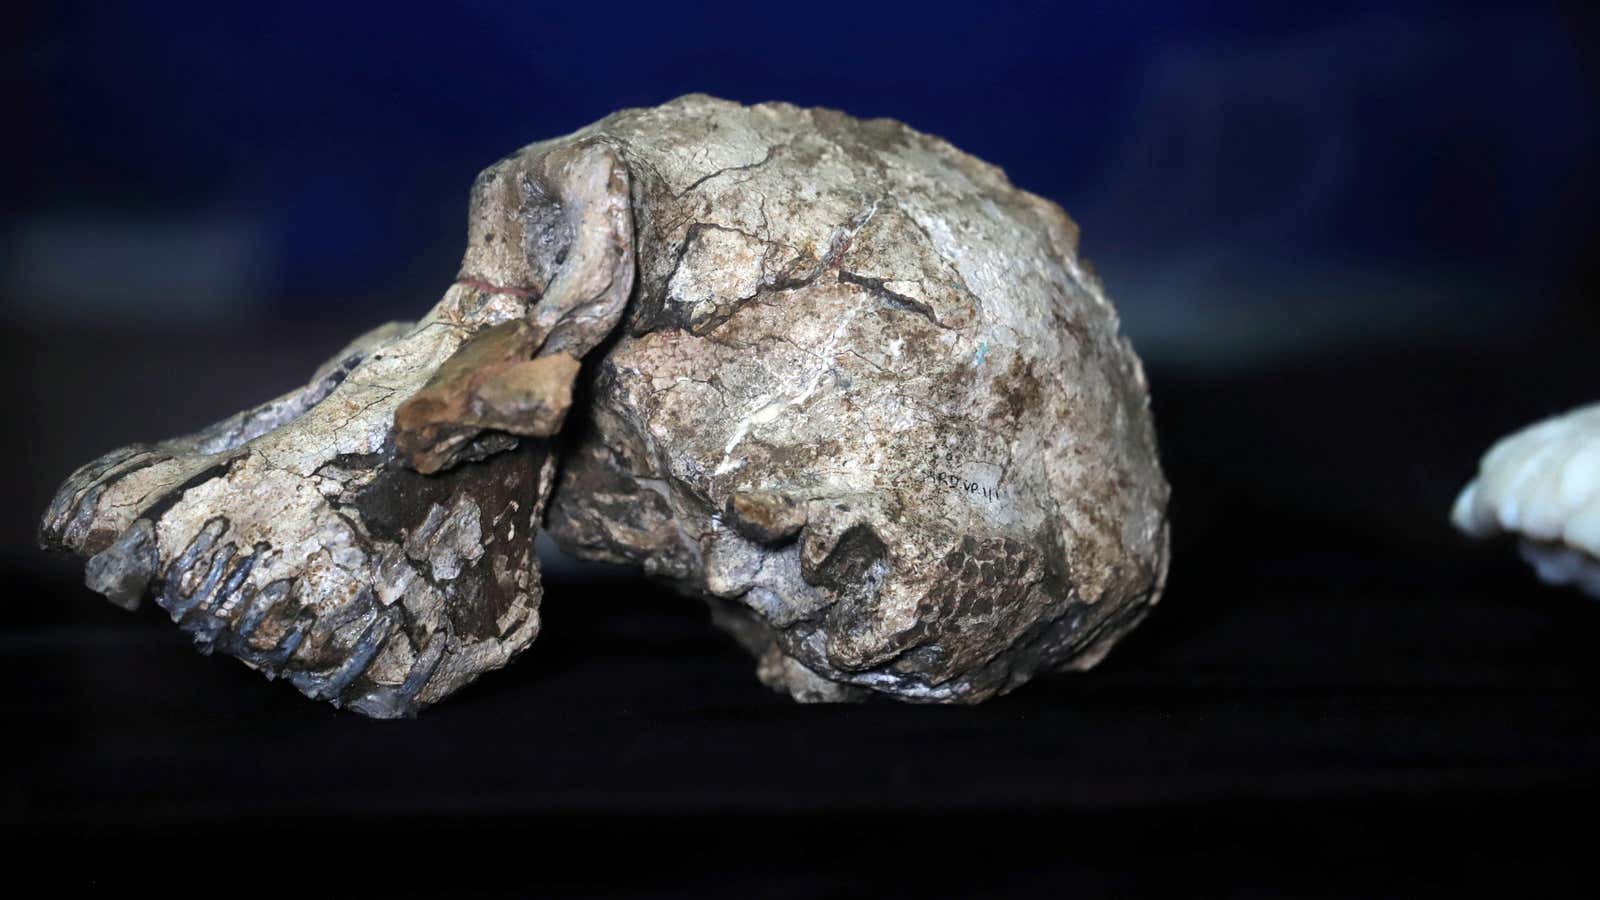 A fossil of Lucy’s ancestor, 3.8 million years old cranium of Australopithecus Anamensis which was discovered in Waranso-Mile paleontological site, Afar region in Ethiopia is seen at the National Museum in Addis Ababa, Ethiopia Aug. 28, 2019.